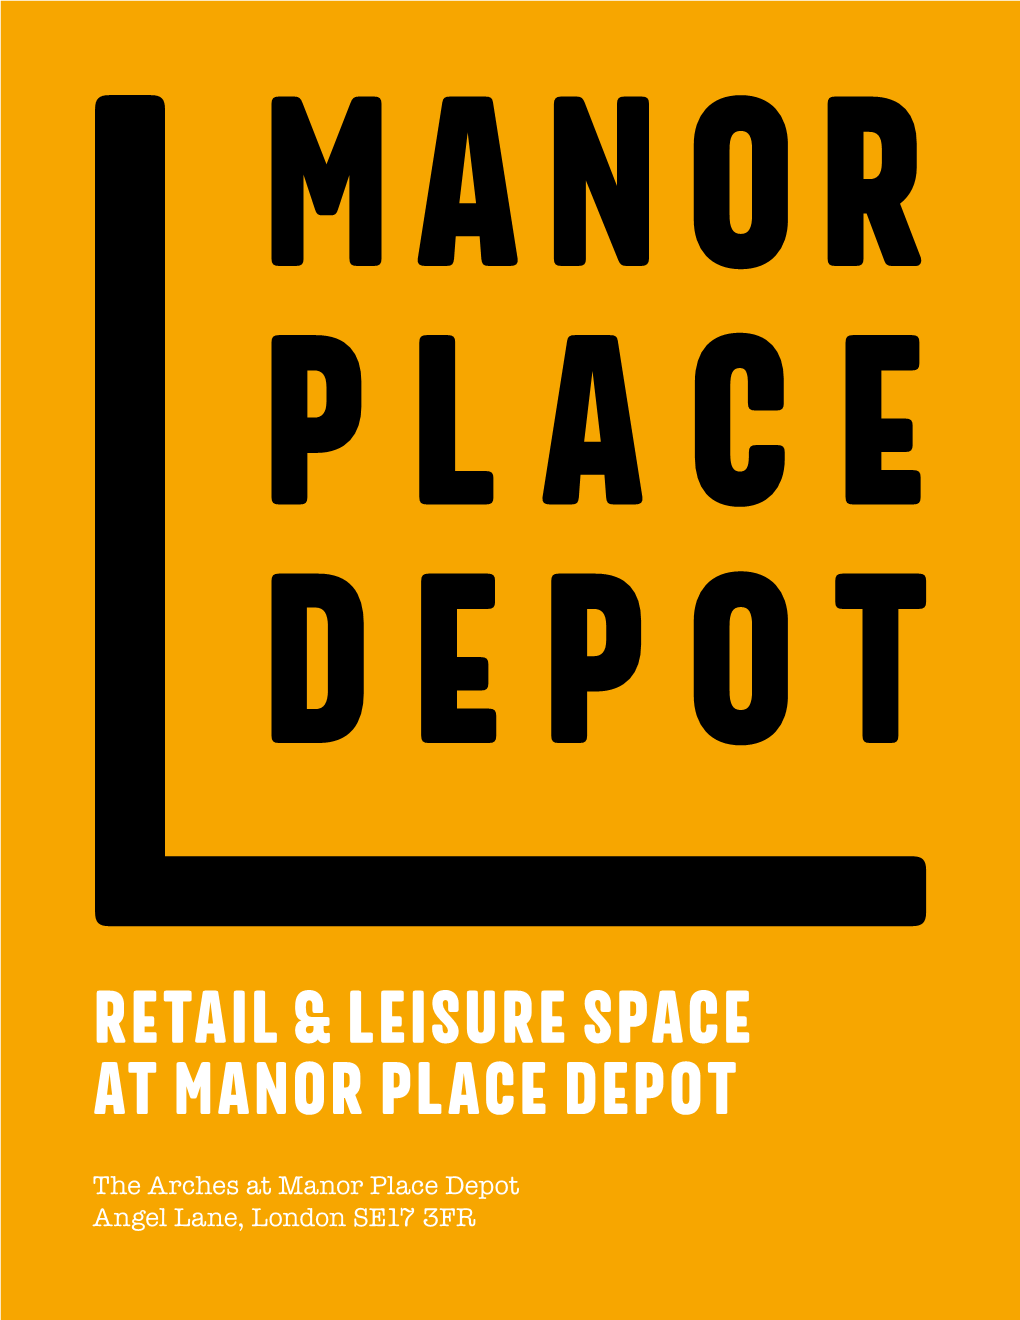 Retail & Leisure Space at Manor Place Depot